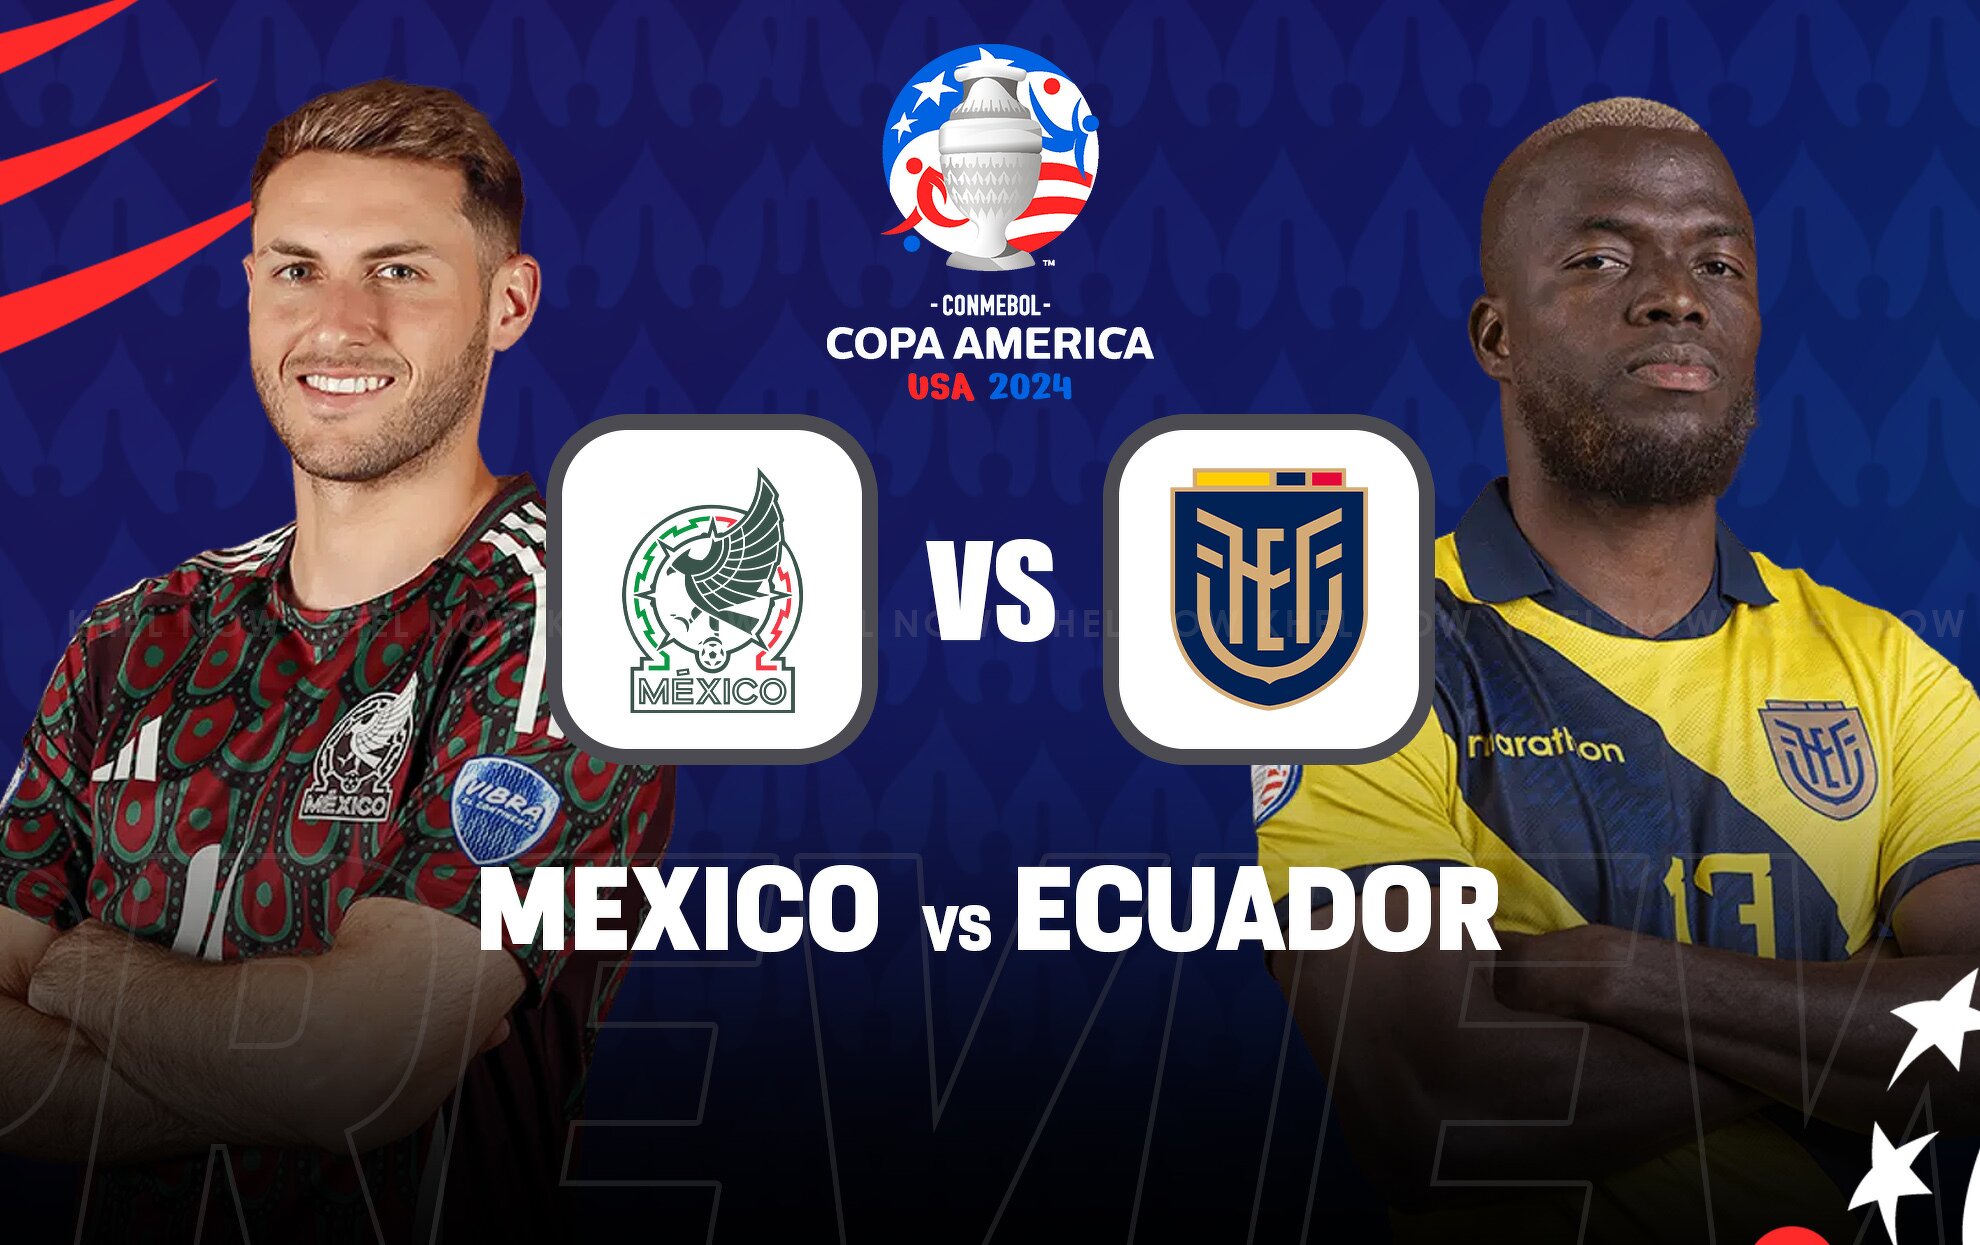 Mexico vs Ecuador Live streaming, TV channel, kickoff time & where to